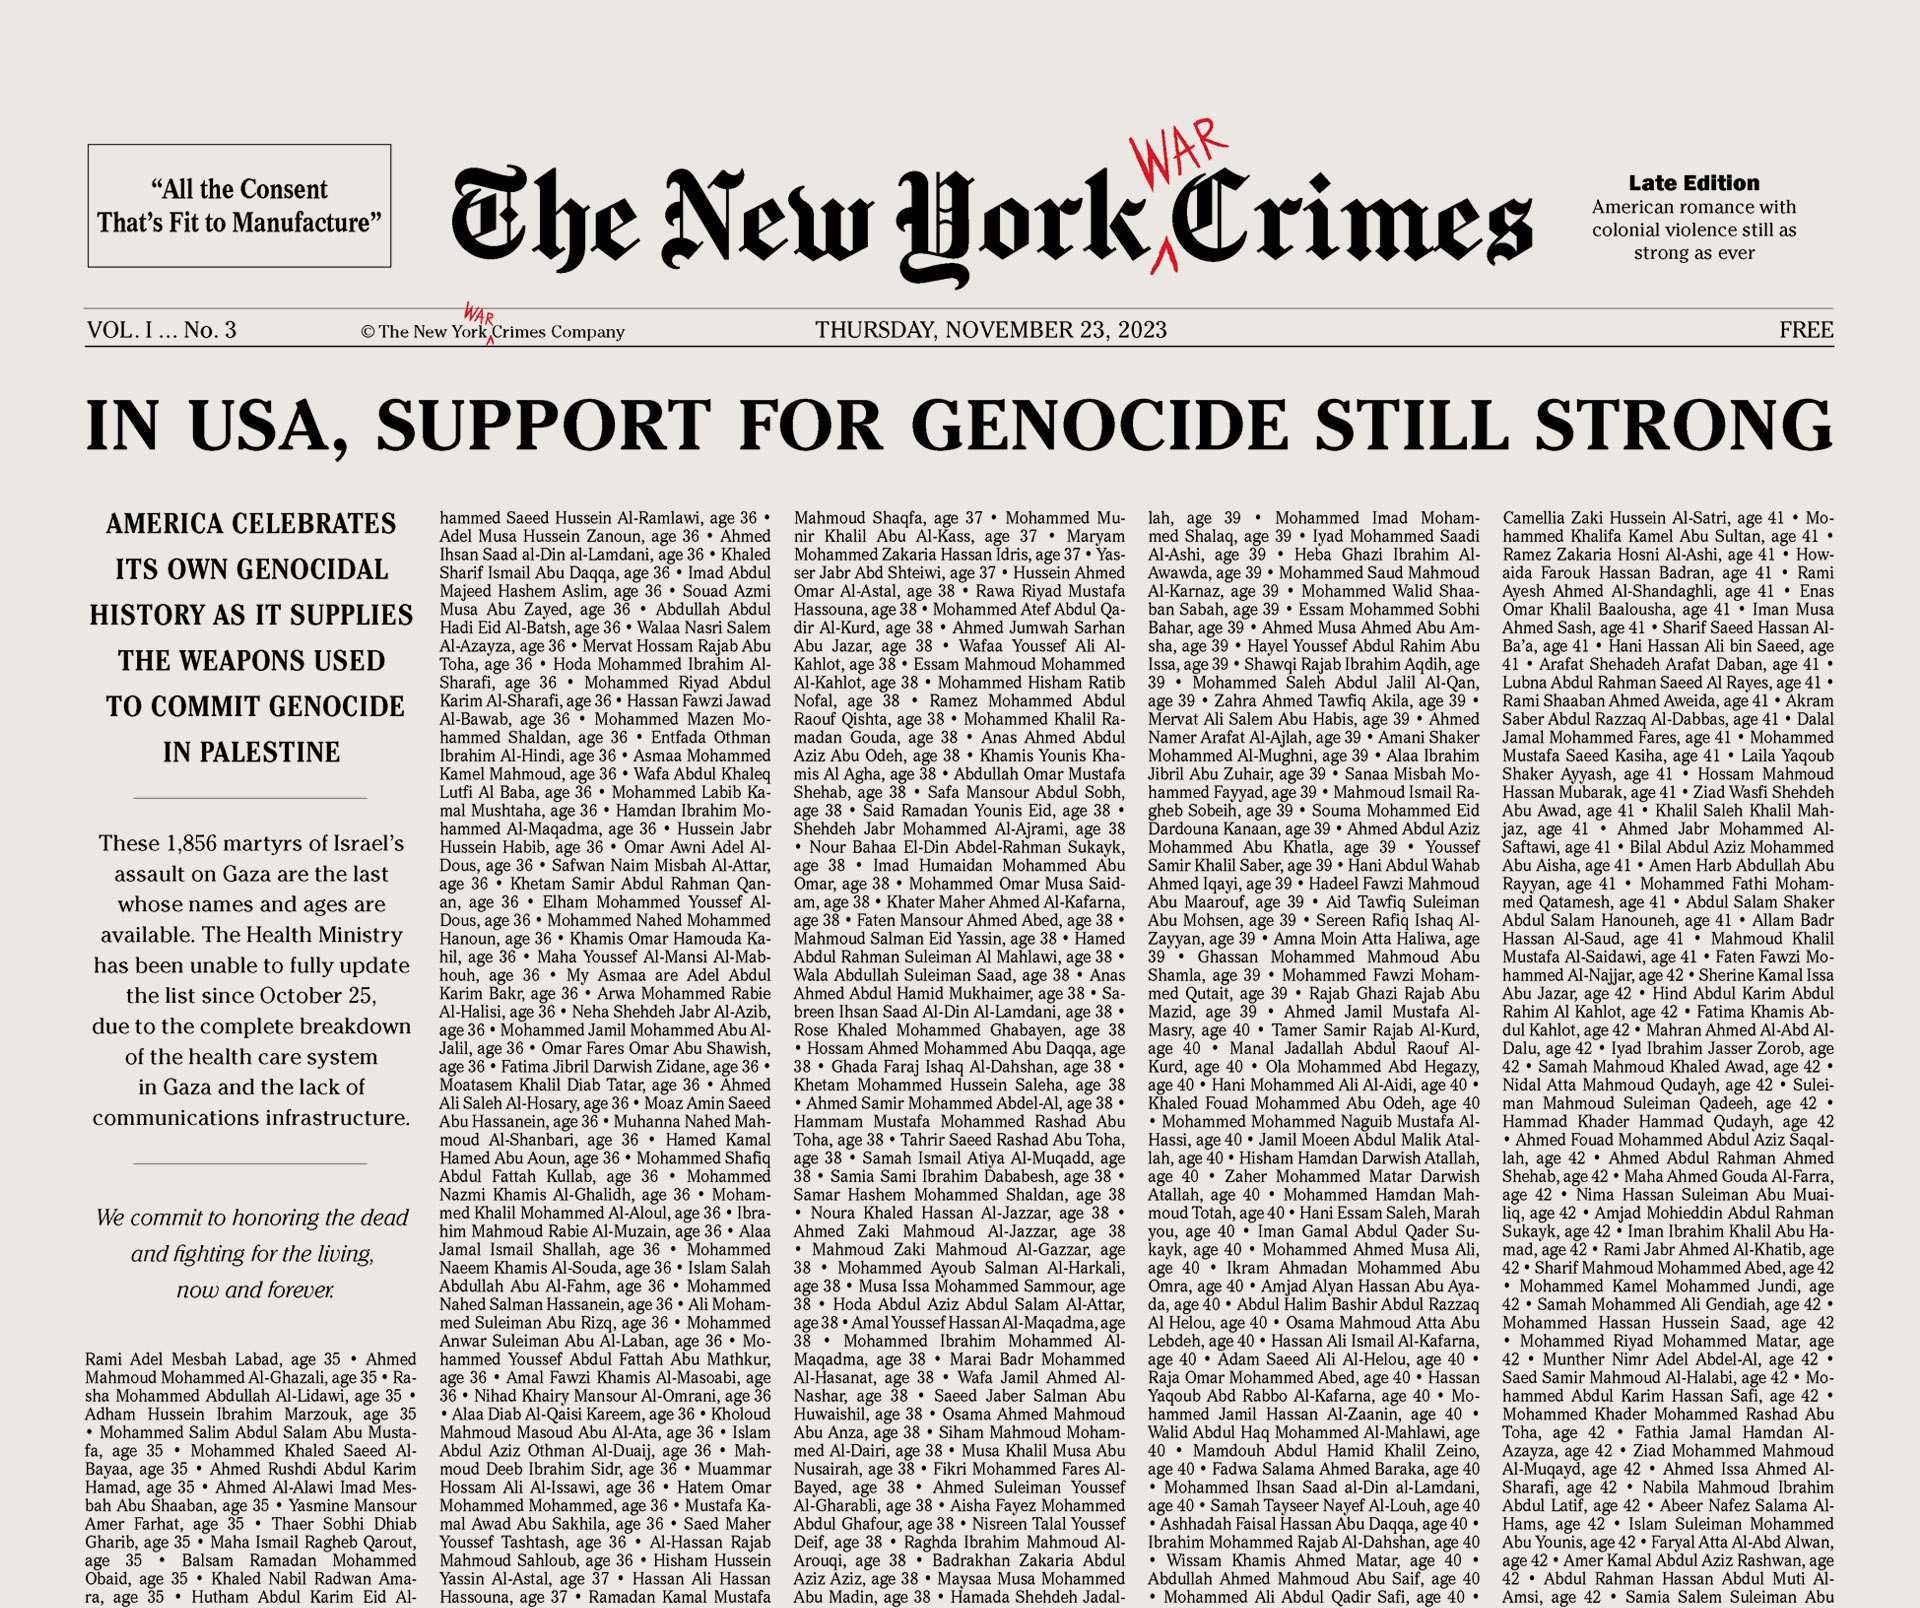 https://newyorkwarcrimes.com/media/pages/print-issue-vol-i-no-3-in-usa-support-for-genocide-is-still-strong/4df627d4ef-1709308050/ny-crimes-03-cover.jpg